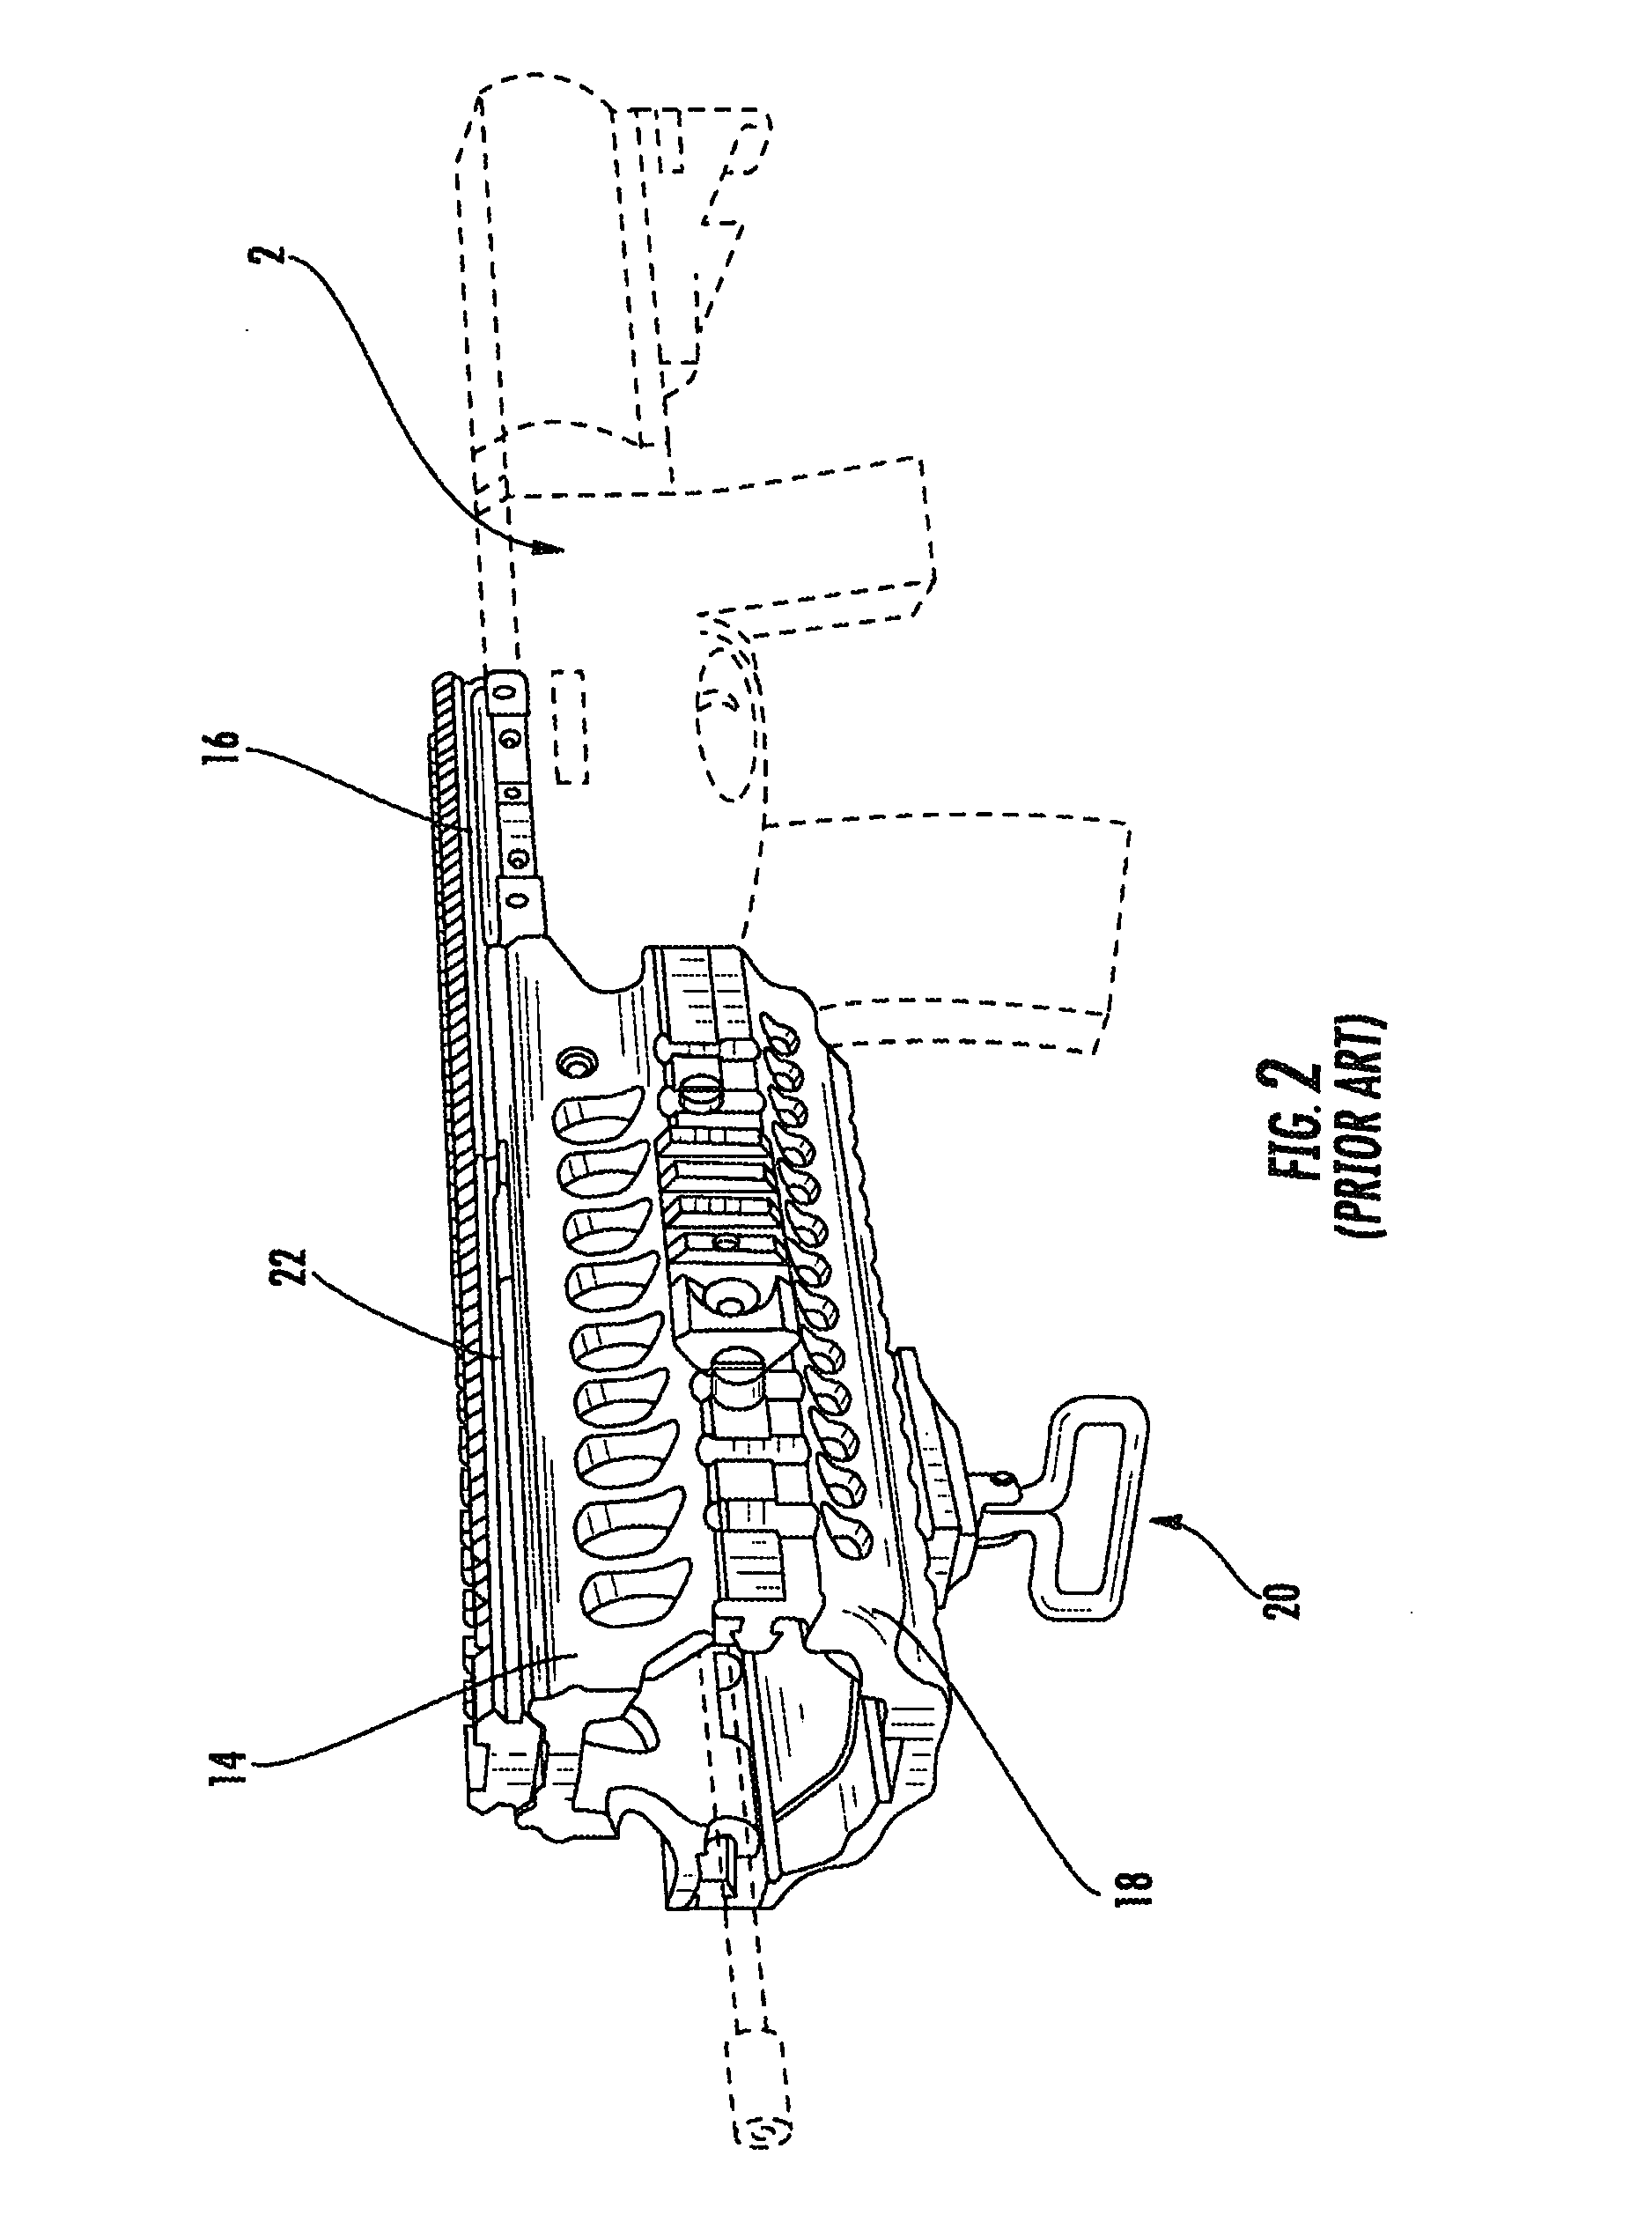 Mounting assembly with positive stop for actuator arm